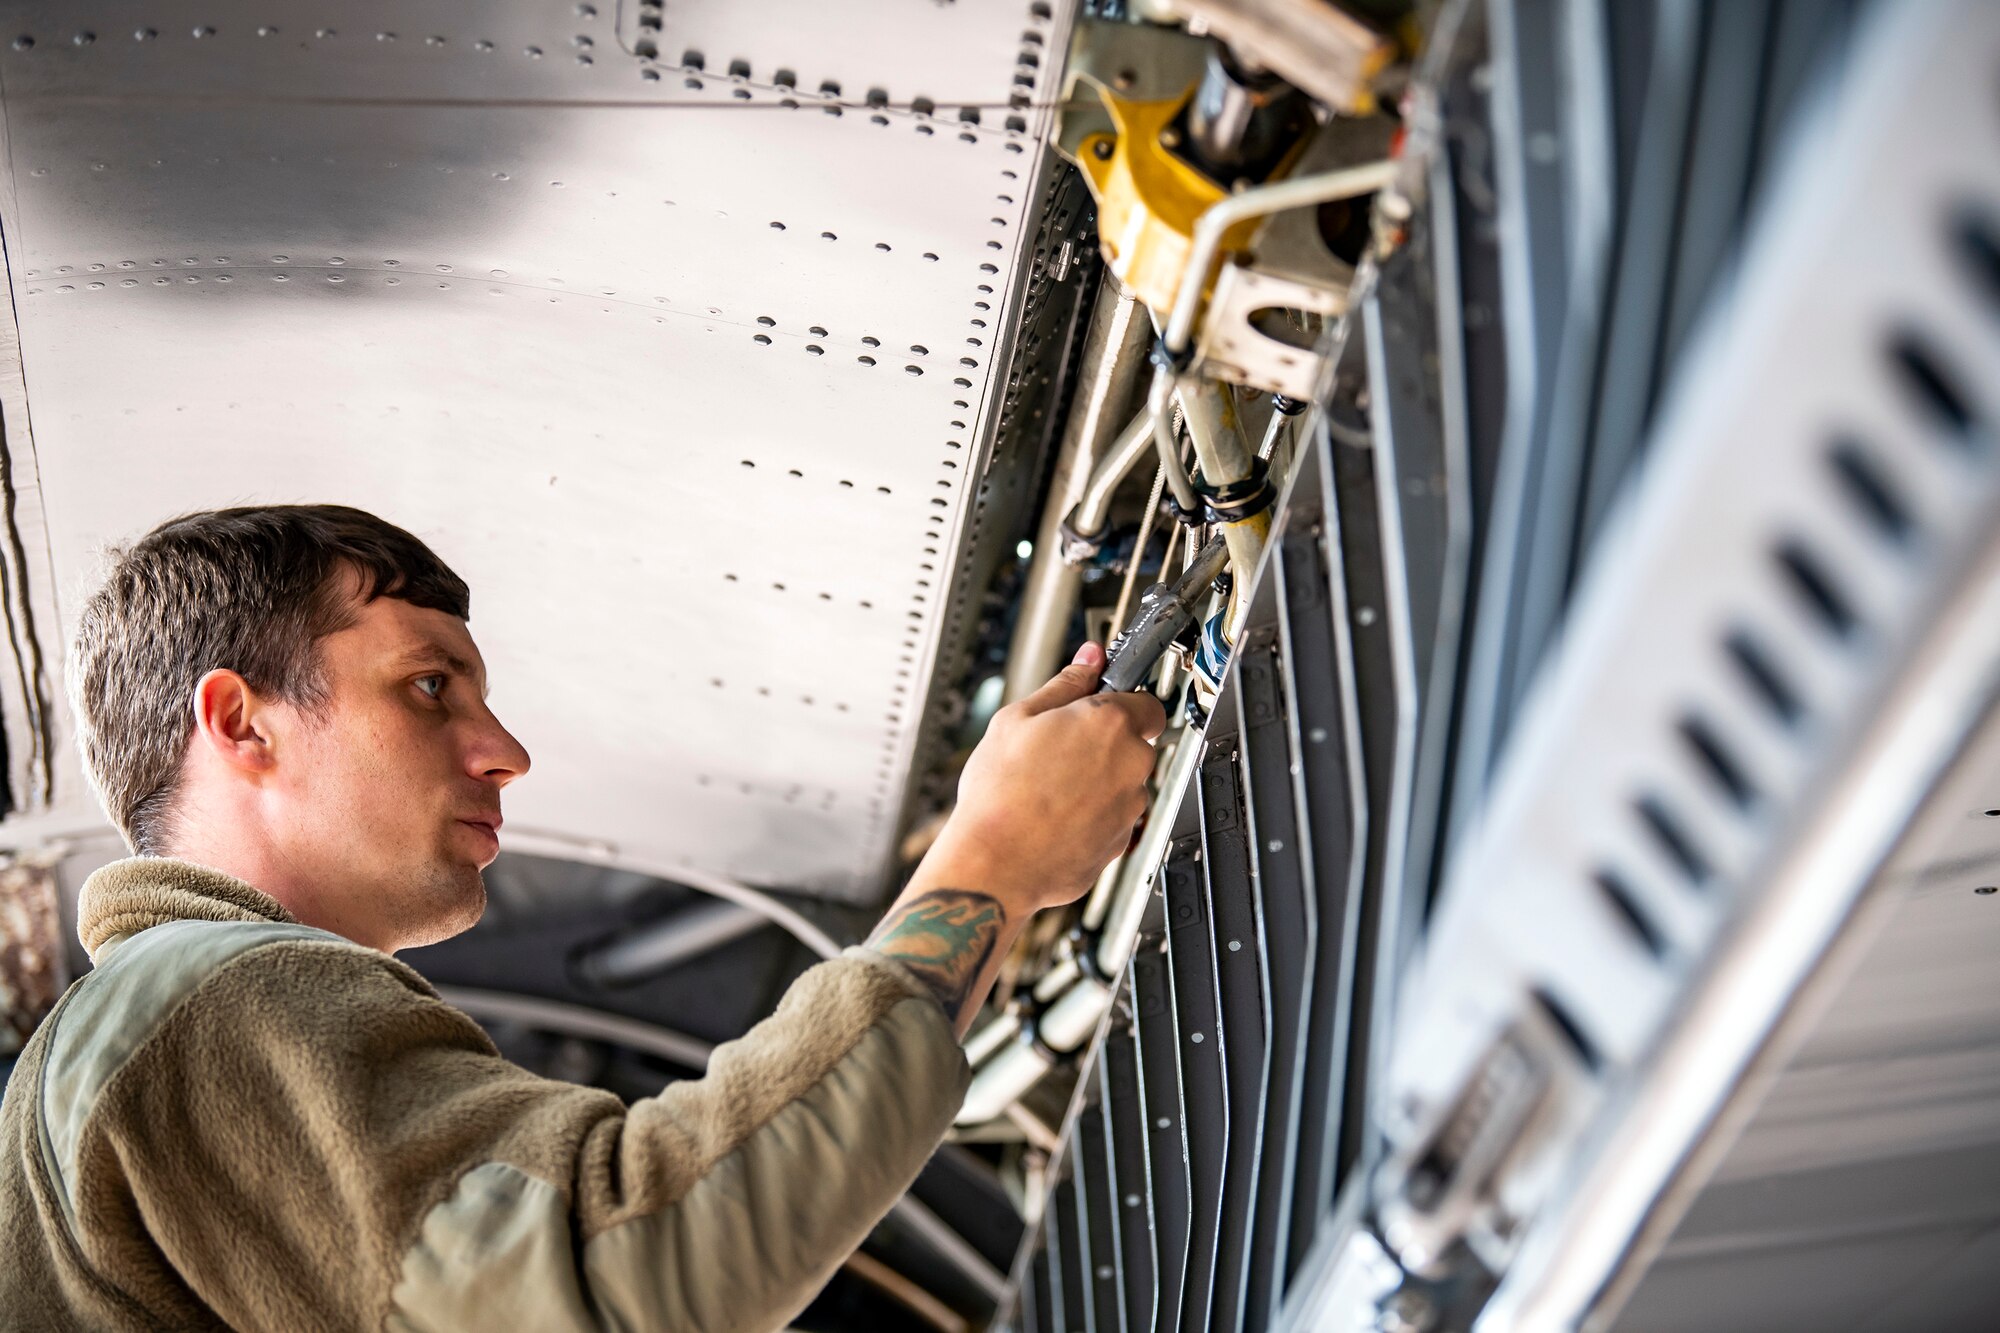 U.S. Air Force Tech. Sgt. Cody Goodin, 100th Aircraft Maintenance Squadron flying crew chief, performs maintenance on the wing of a KC-135 Stratotanker during an Agile Combat Employment exercise at RAF Fairford, England, Sept. 13, 2021. Airmen from the 501st Combat Support Wing, 100th Air Refueling Wing and 352d Special Operations Wing partnered to conduct an ACE exercise to test their overall readiness and lethality capabilities. The exercise enables U.S. forces in Europe to operate from locations with varying levels of capacity and support. (U.S. Air Force photo by Senior Airman Eugene Oliver)